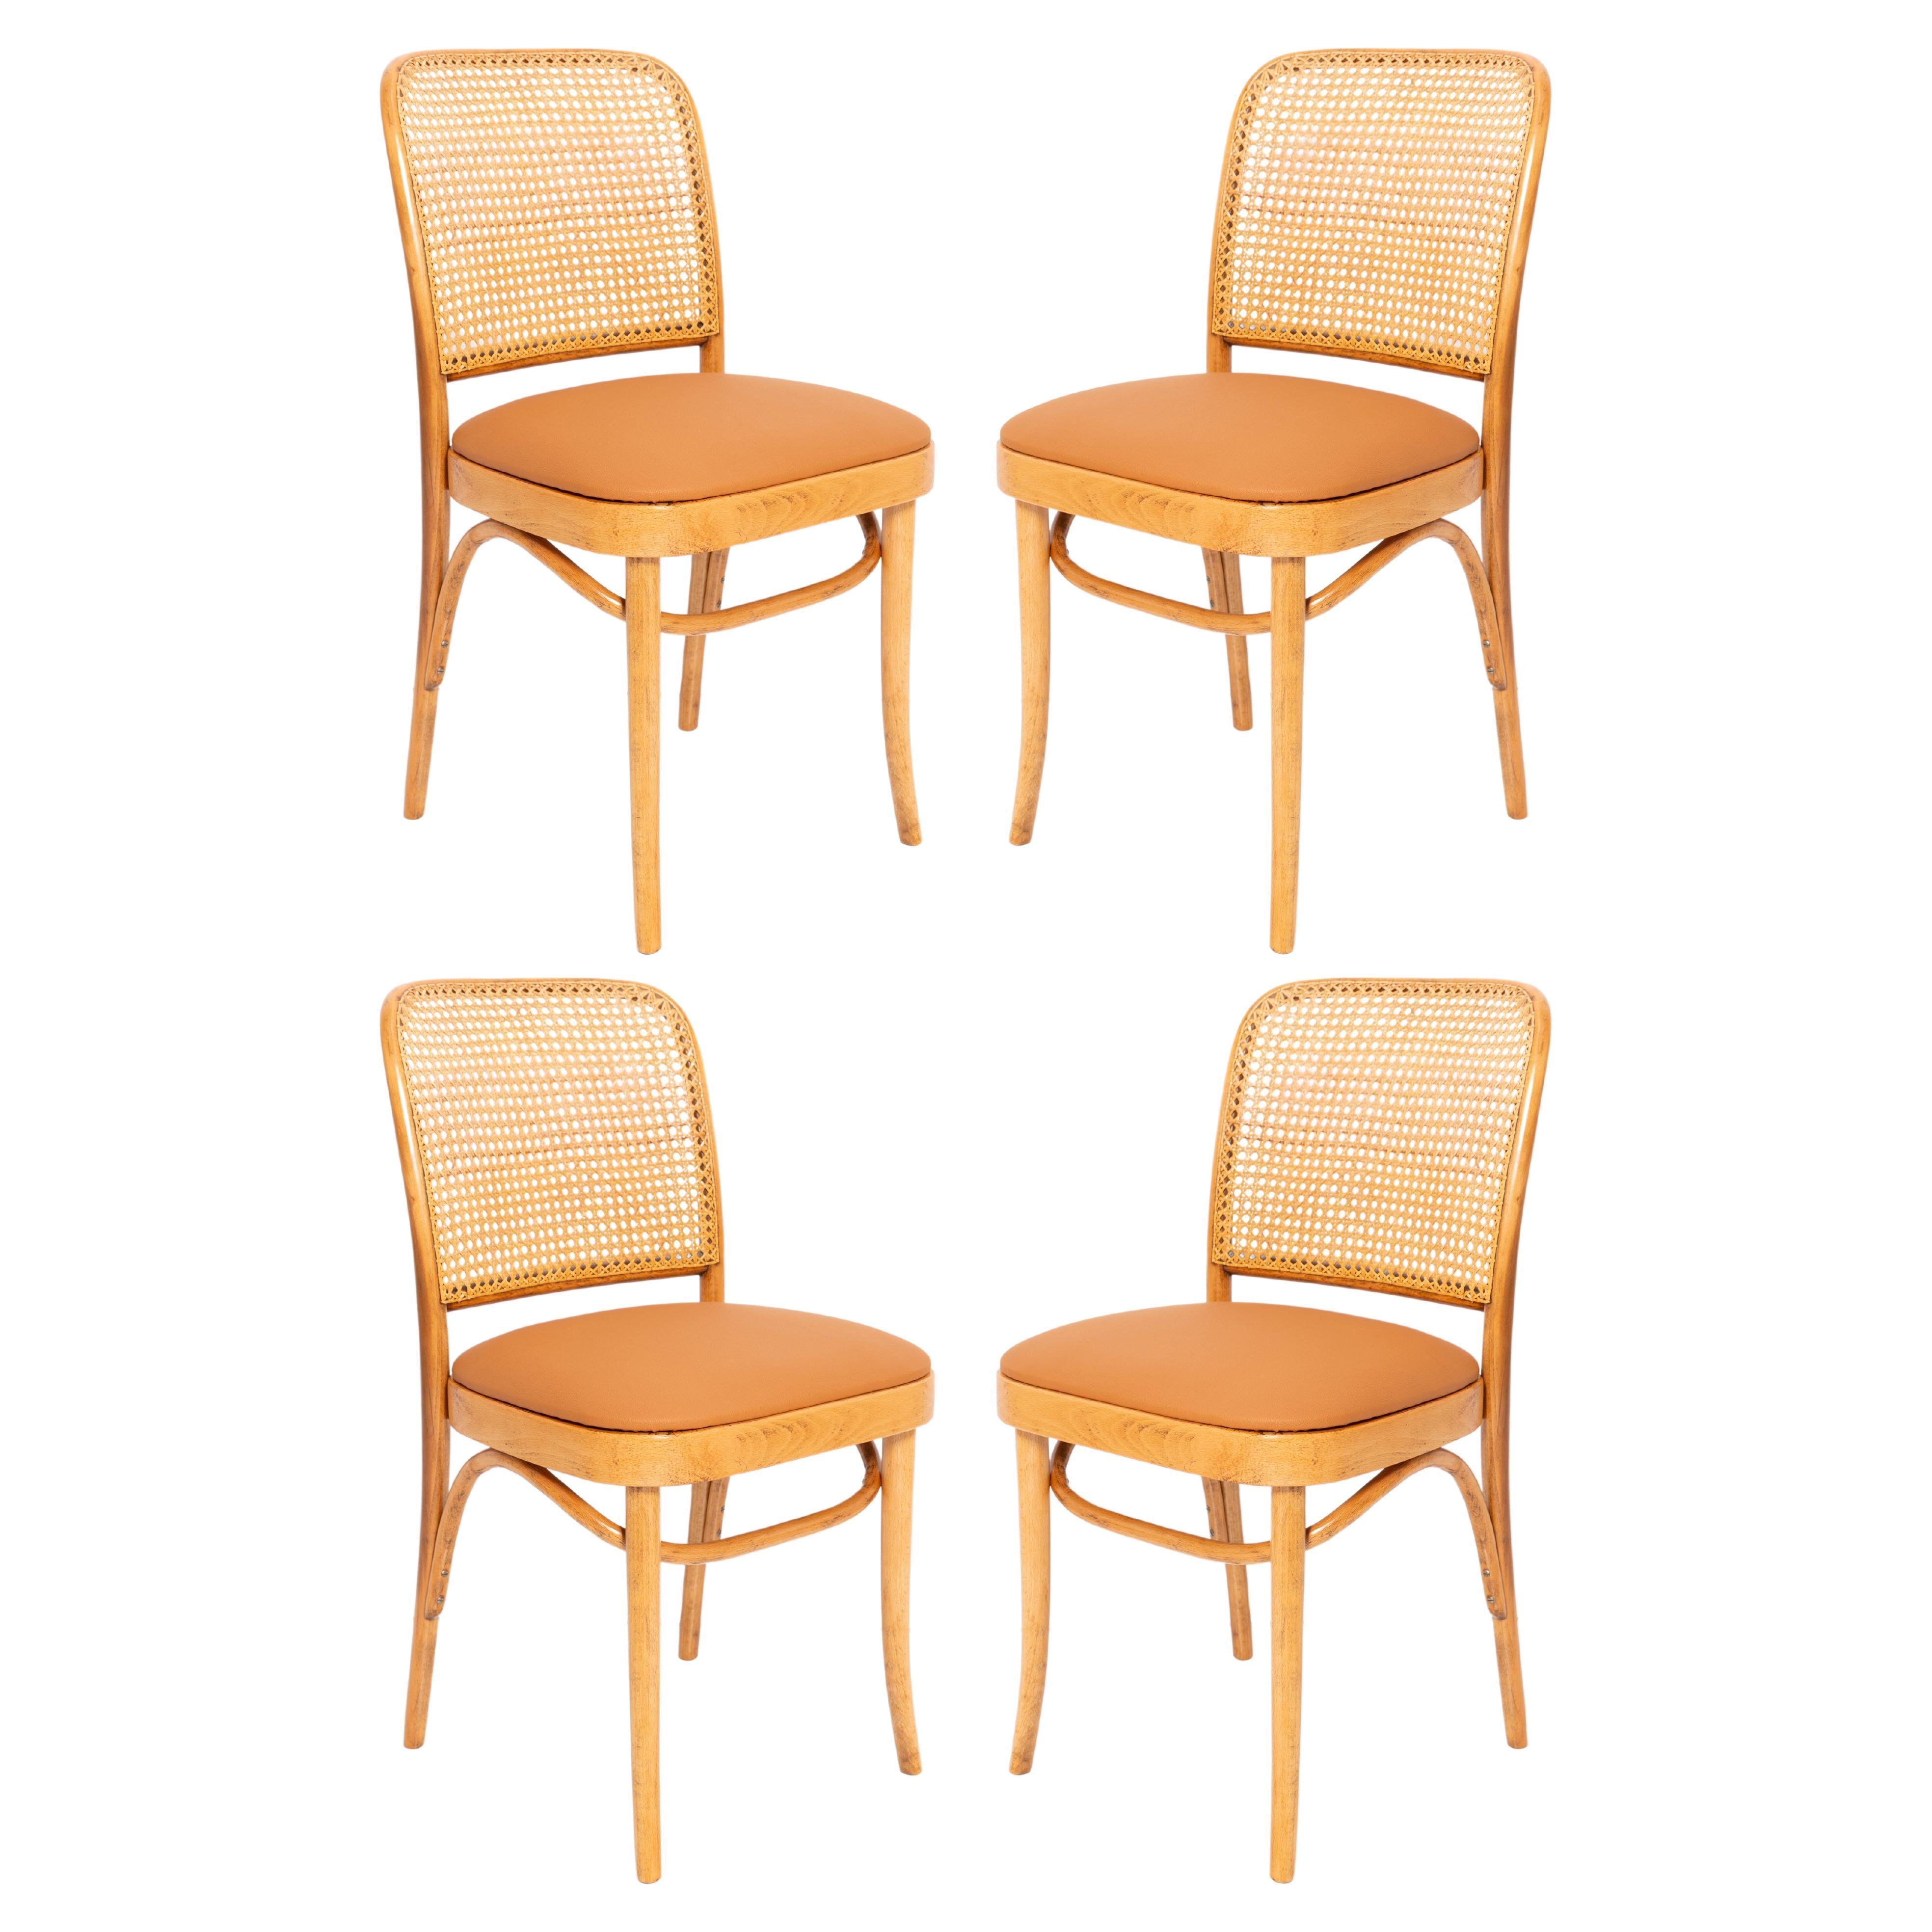 Set of Four Mid-Century Camel Faux Leather Thonet Wood Rattan Chairs, 1960s For Sale